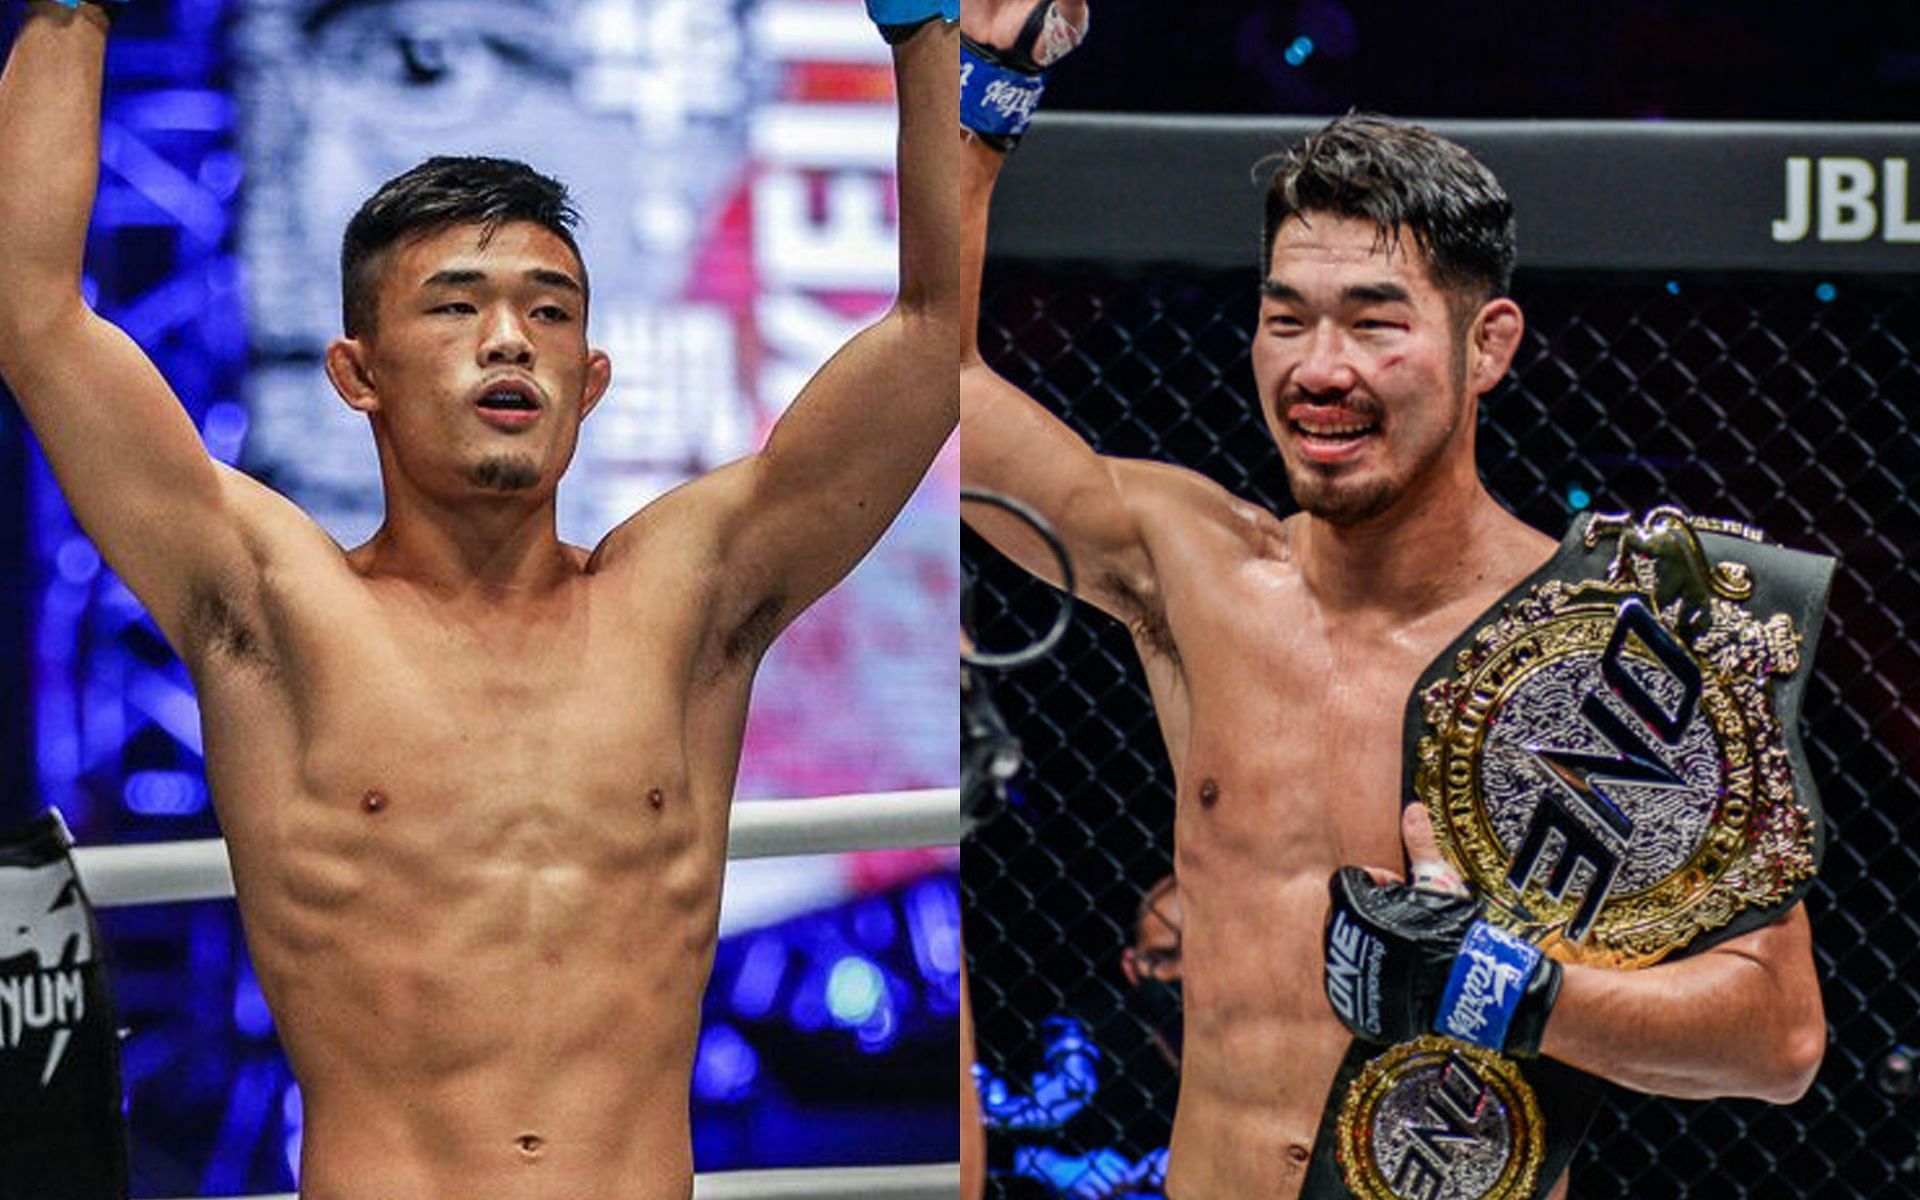 Christian Lee (L) and Ok Rae Yoon (R) are set to headline ONE 160 on August 26. | [Photos: ONE Championship]